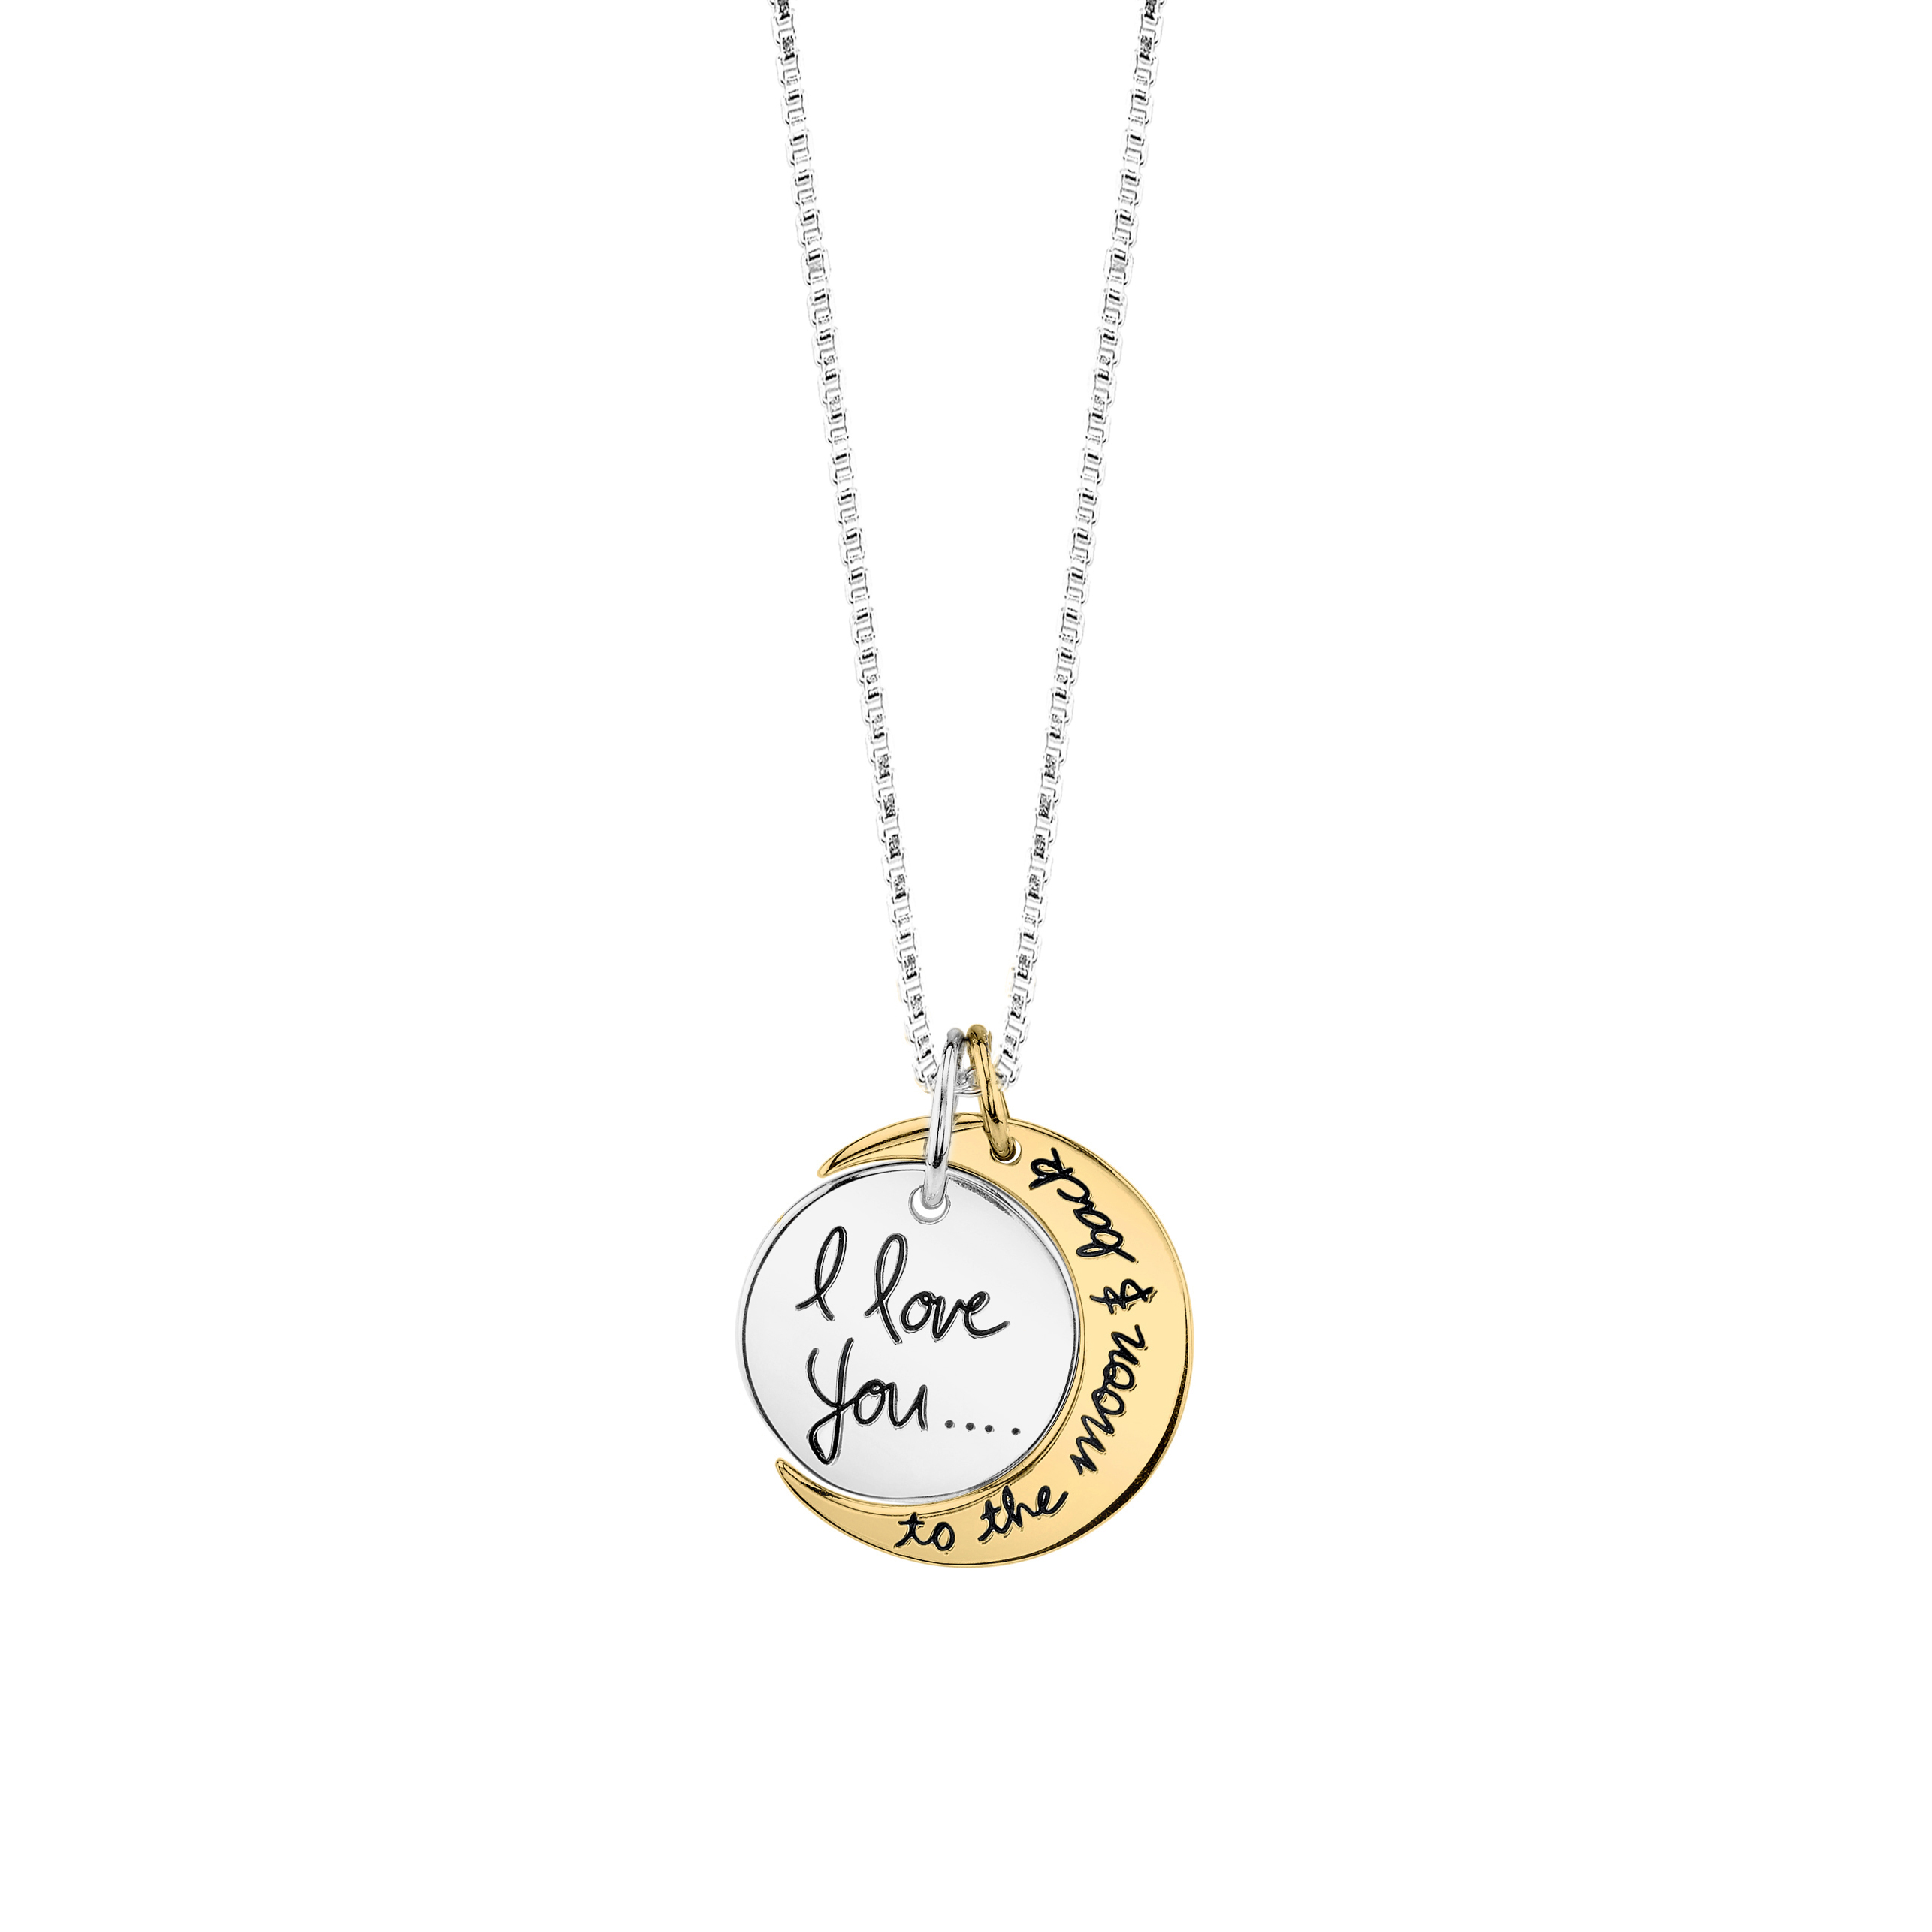 Little Luxuries Two Tone Sterling Silver and Yellow Gold Flashed "I Love You To The Moon and Back" Pendant Necklace, 18" - image 1 of 2